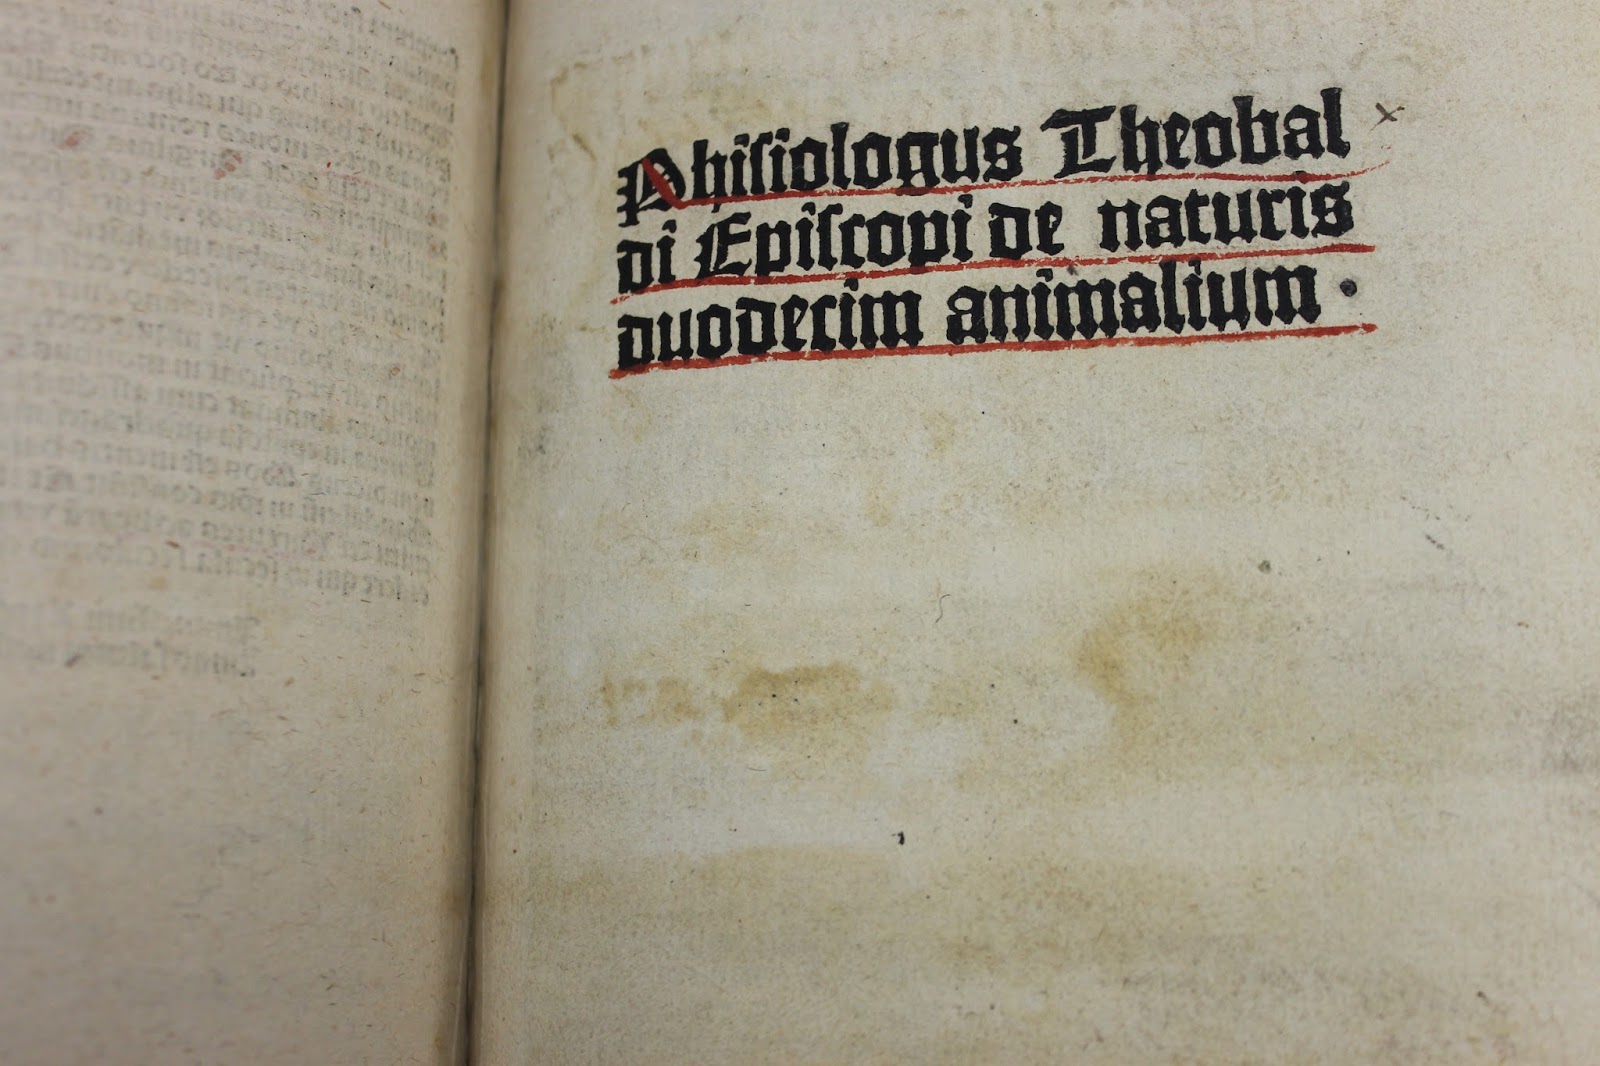 Inside page of Theobaldus' Phisiologus de Naturis Duodecim Animalum, 1493, with text written in black and red ink